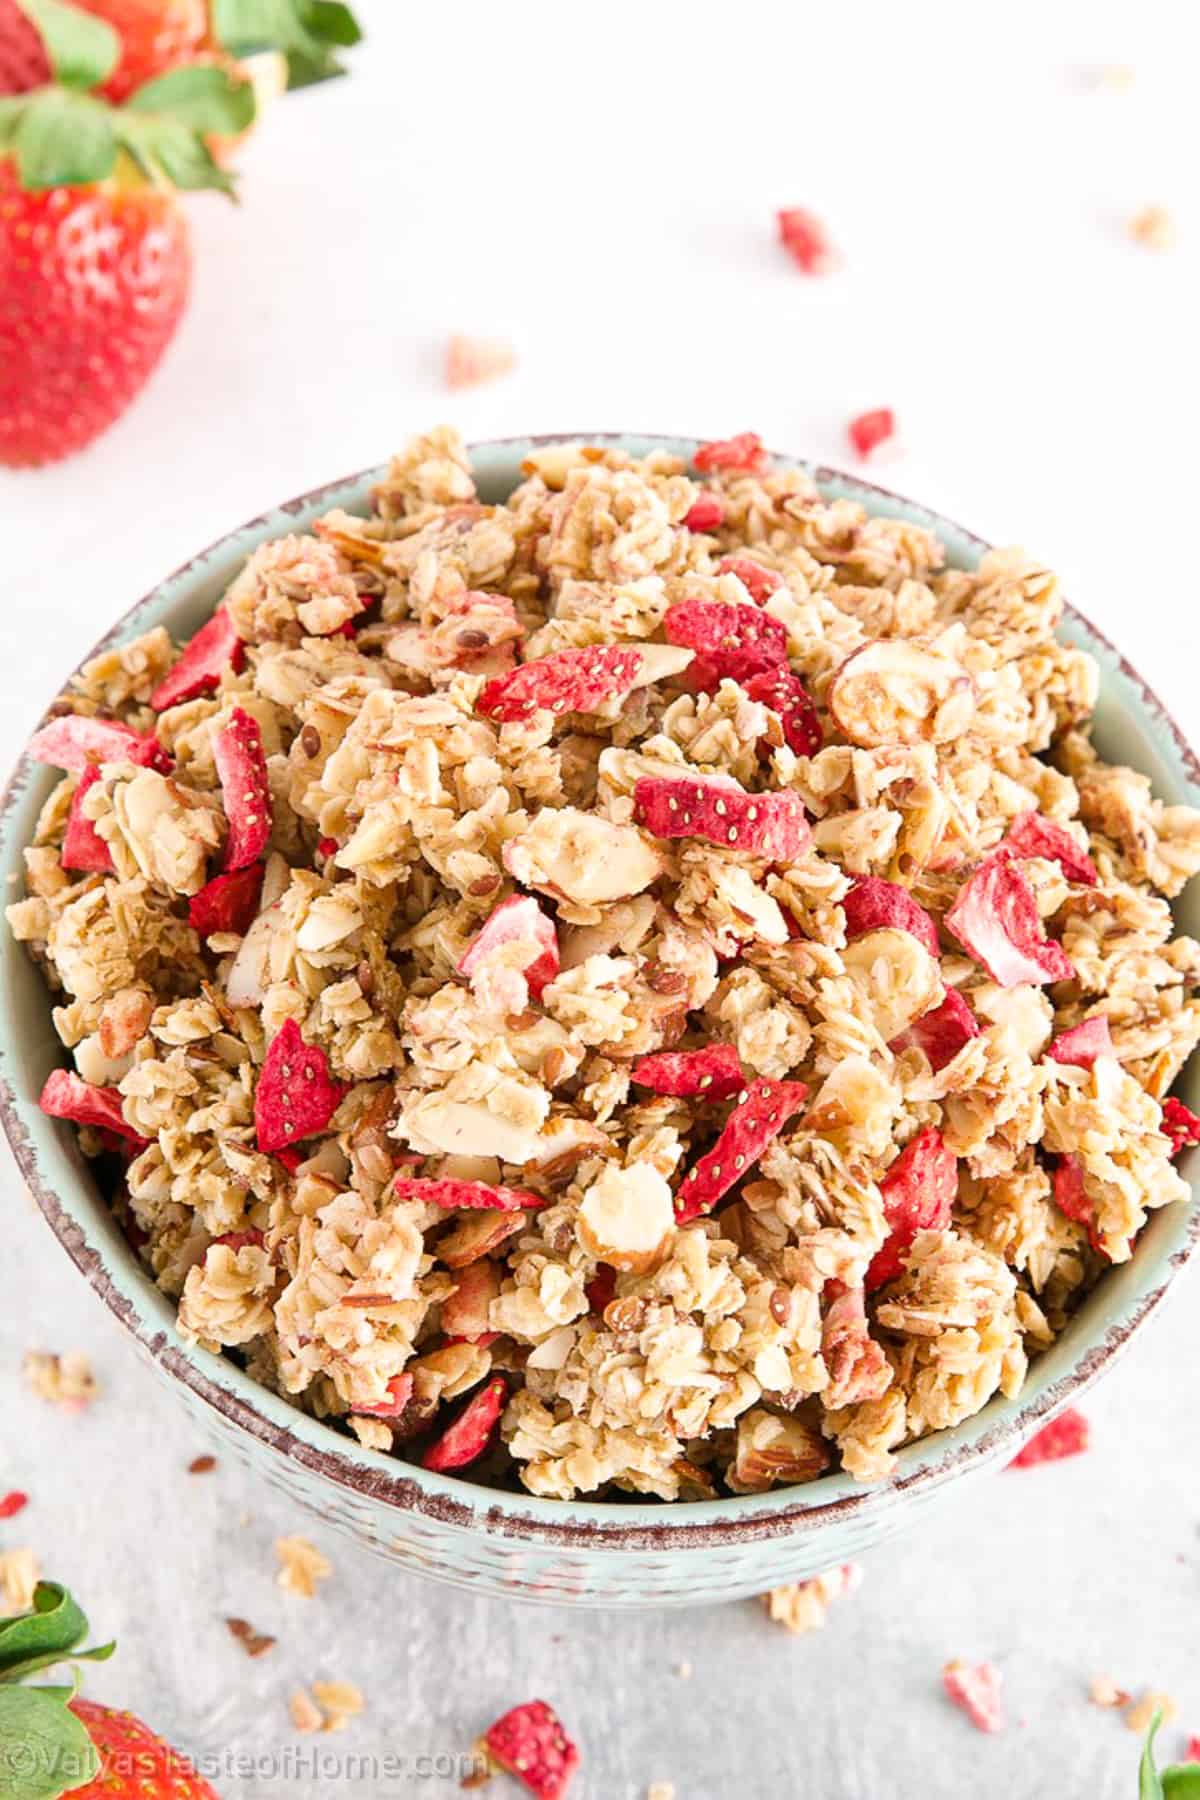 This homemade granola recipe will help solve all of those problems and give you a great taste of granola right in the comfort of your home using pantry staple ingredients.